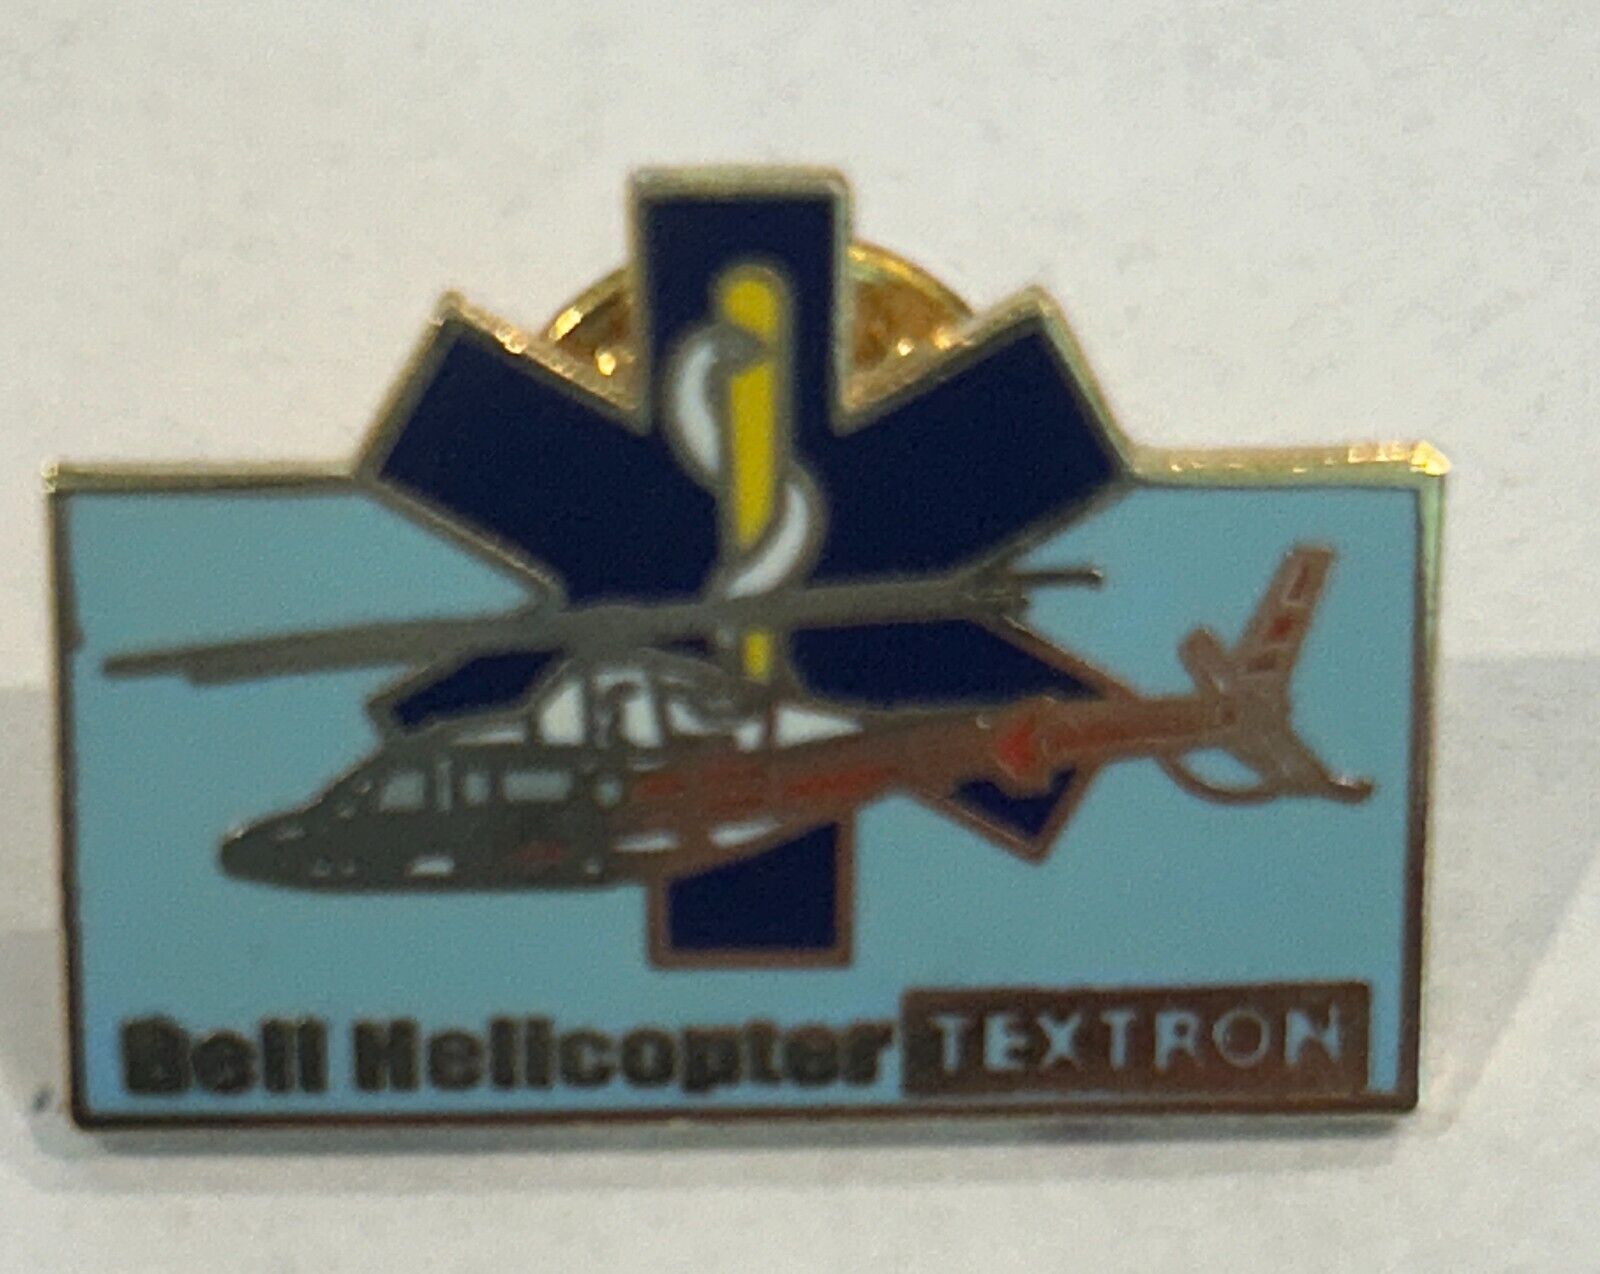 Bell Helicopter TEXTRON Collector Pin